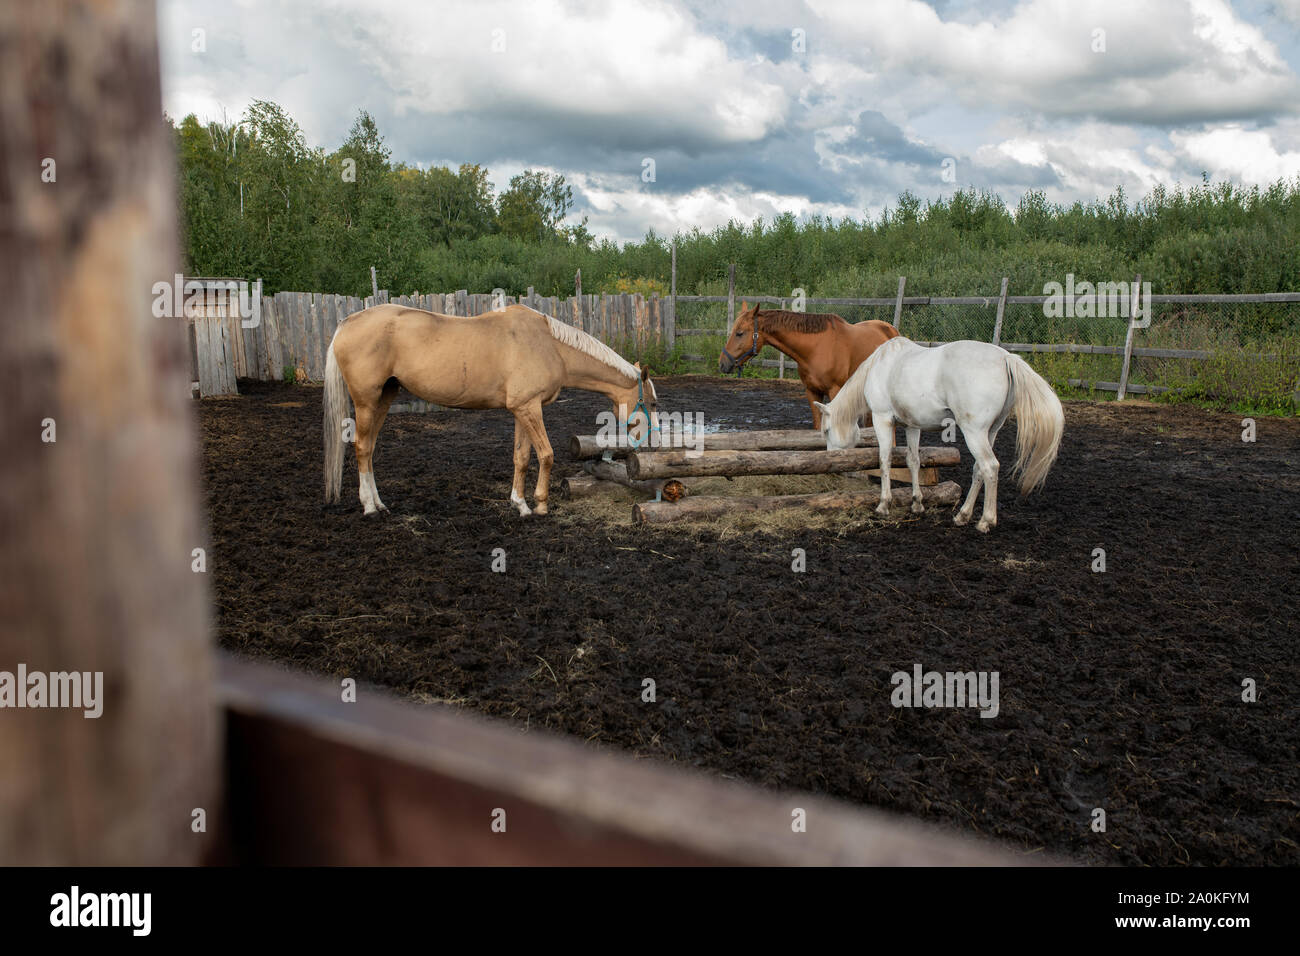 Small group of domestic horses of various colors eating in rural environment Stock Photo